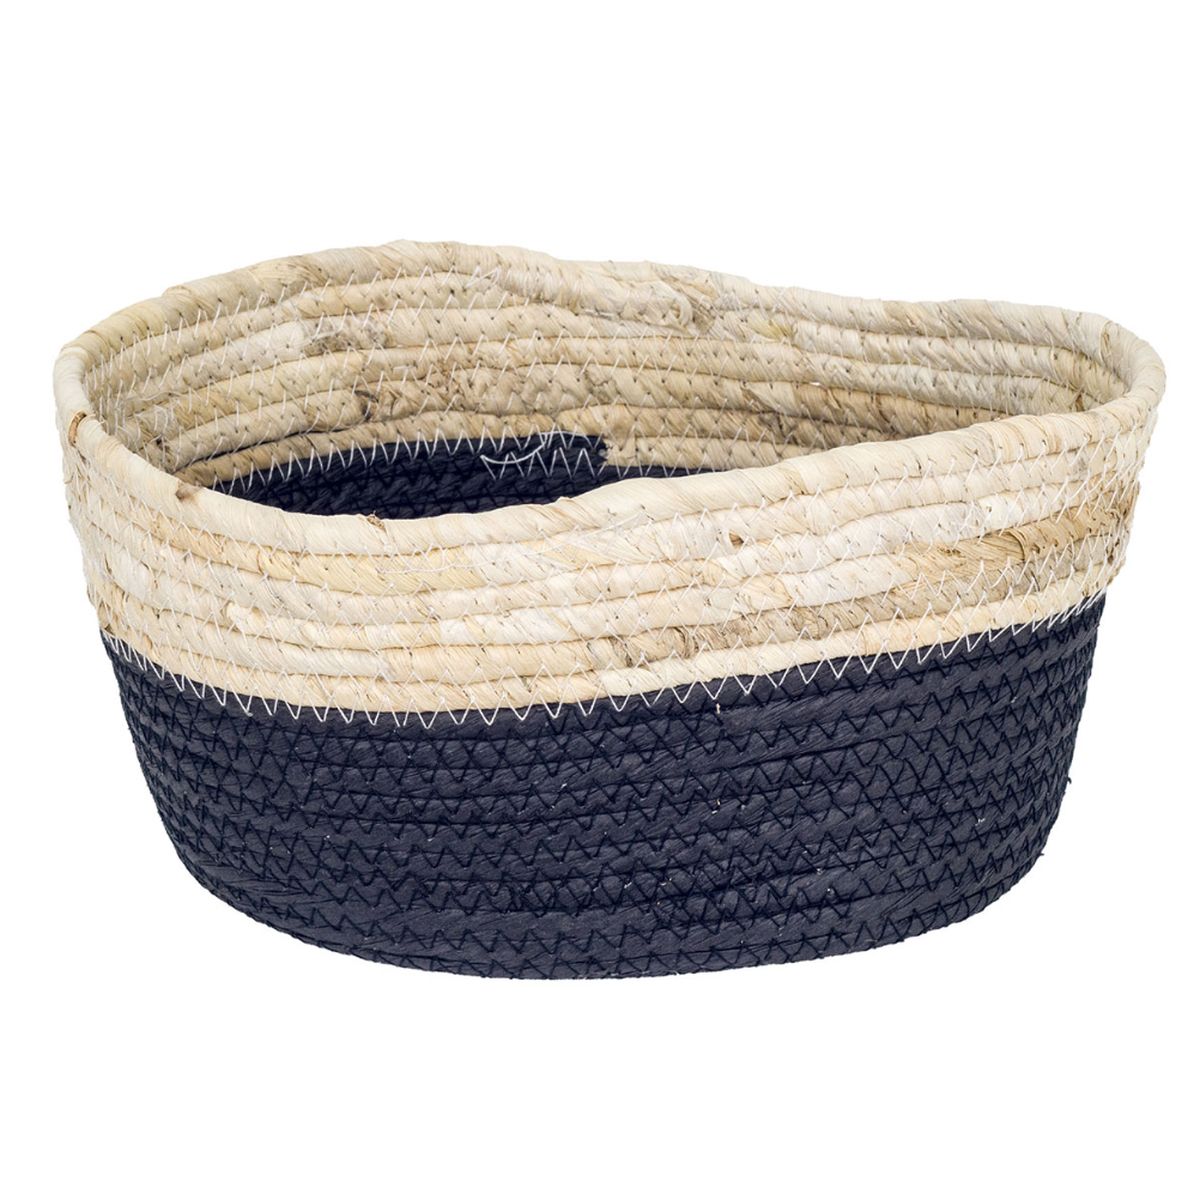 Seagrass basket - black and natural